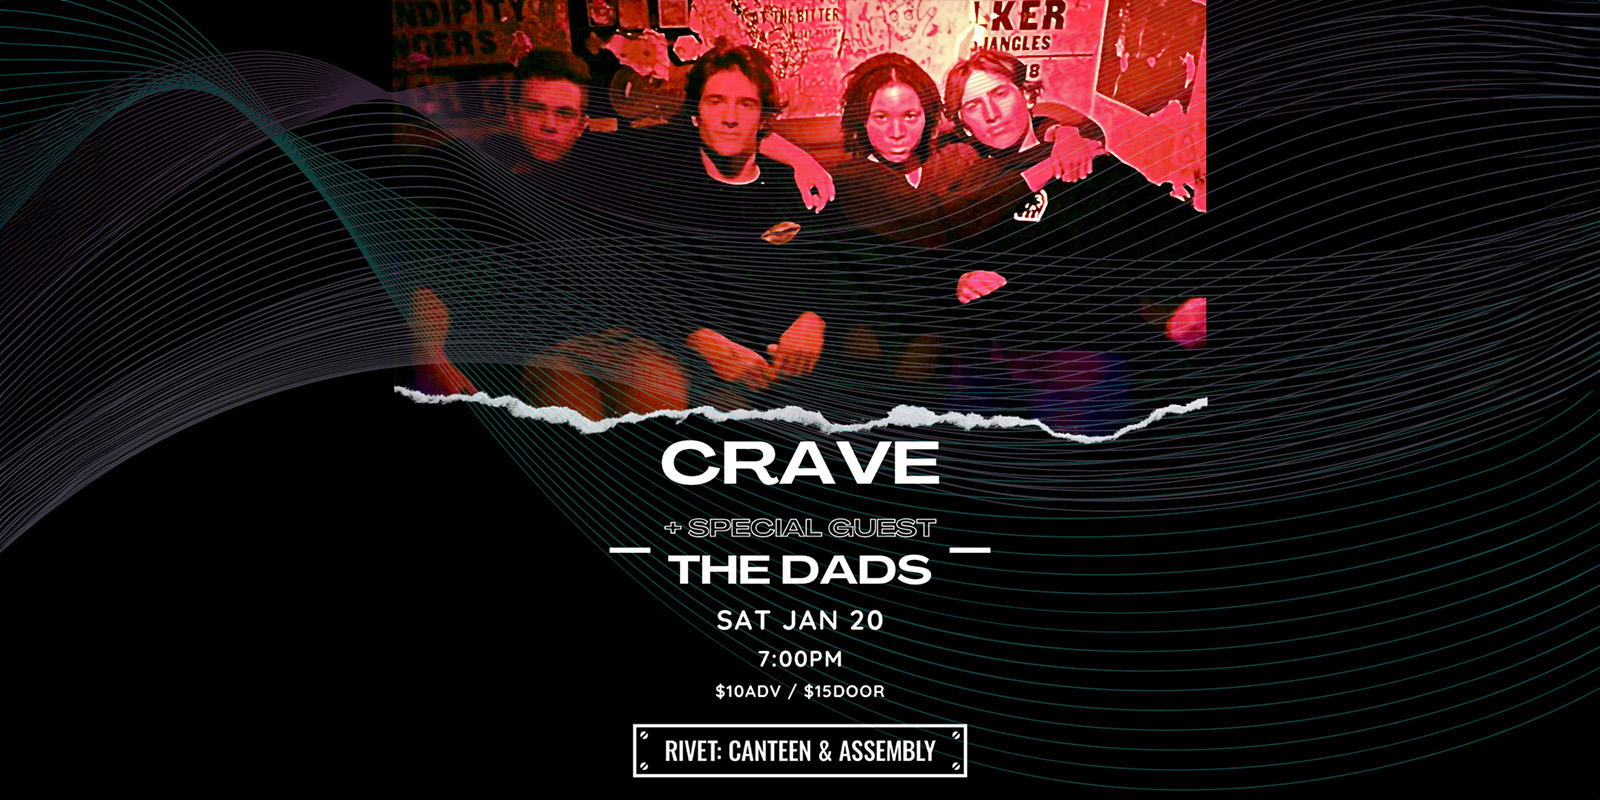 Crave performing live at Rivet: Canteen & Assembly on Saturday, January 20th, 2024. Special guest performance by The Dads! All ages are welcome. Tickets on sale now!